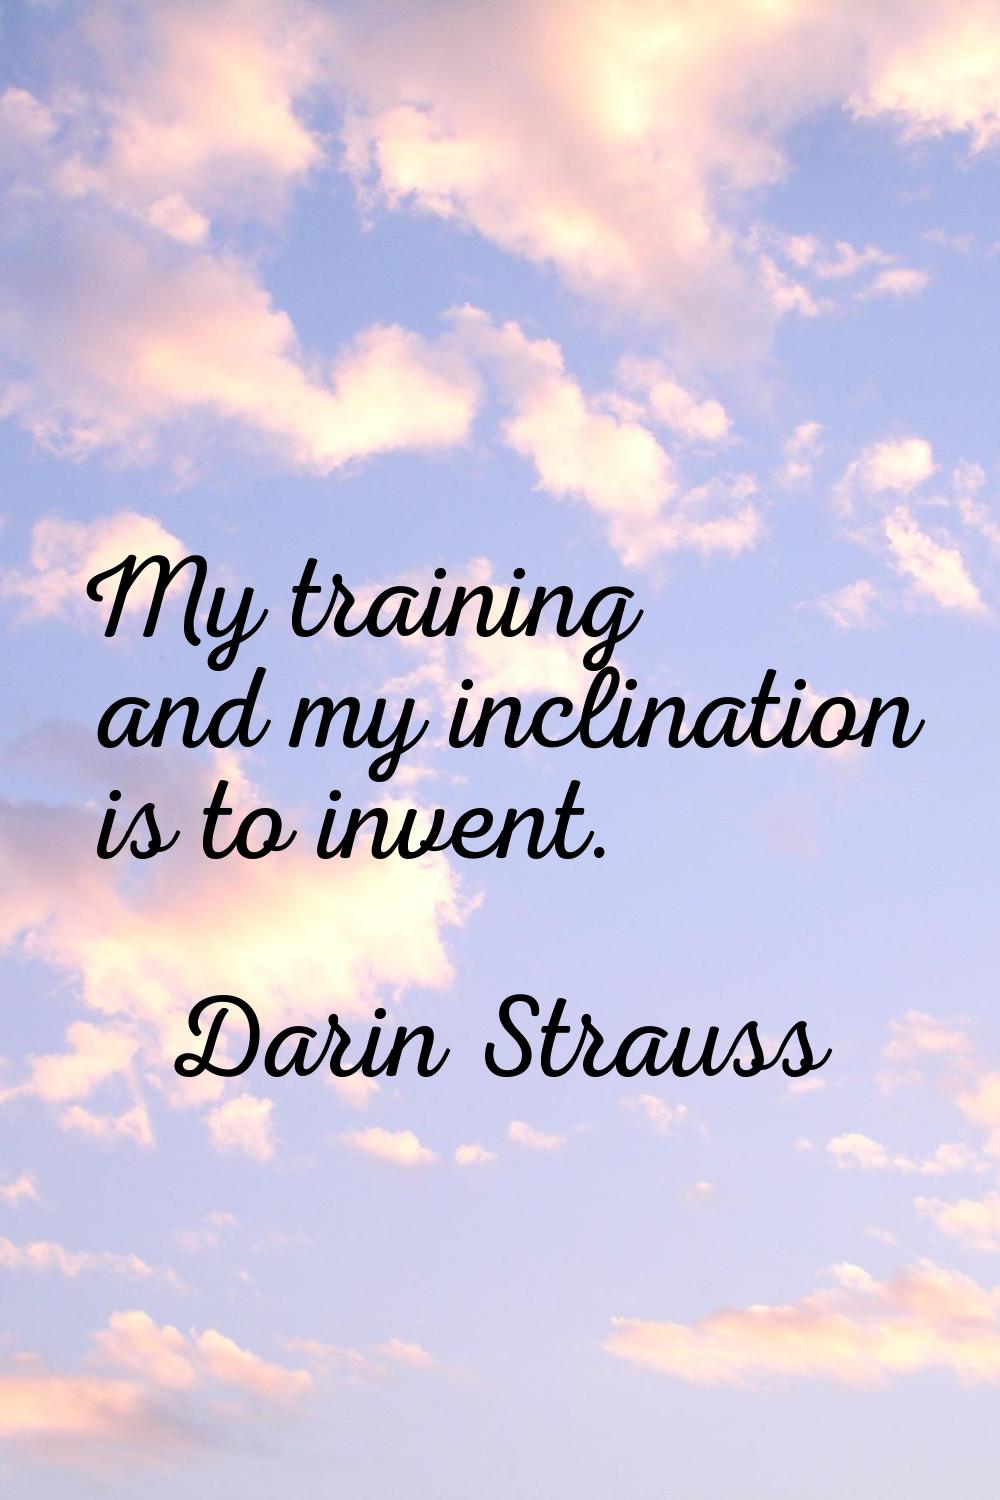 My training and my inclination is to invent.